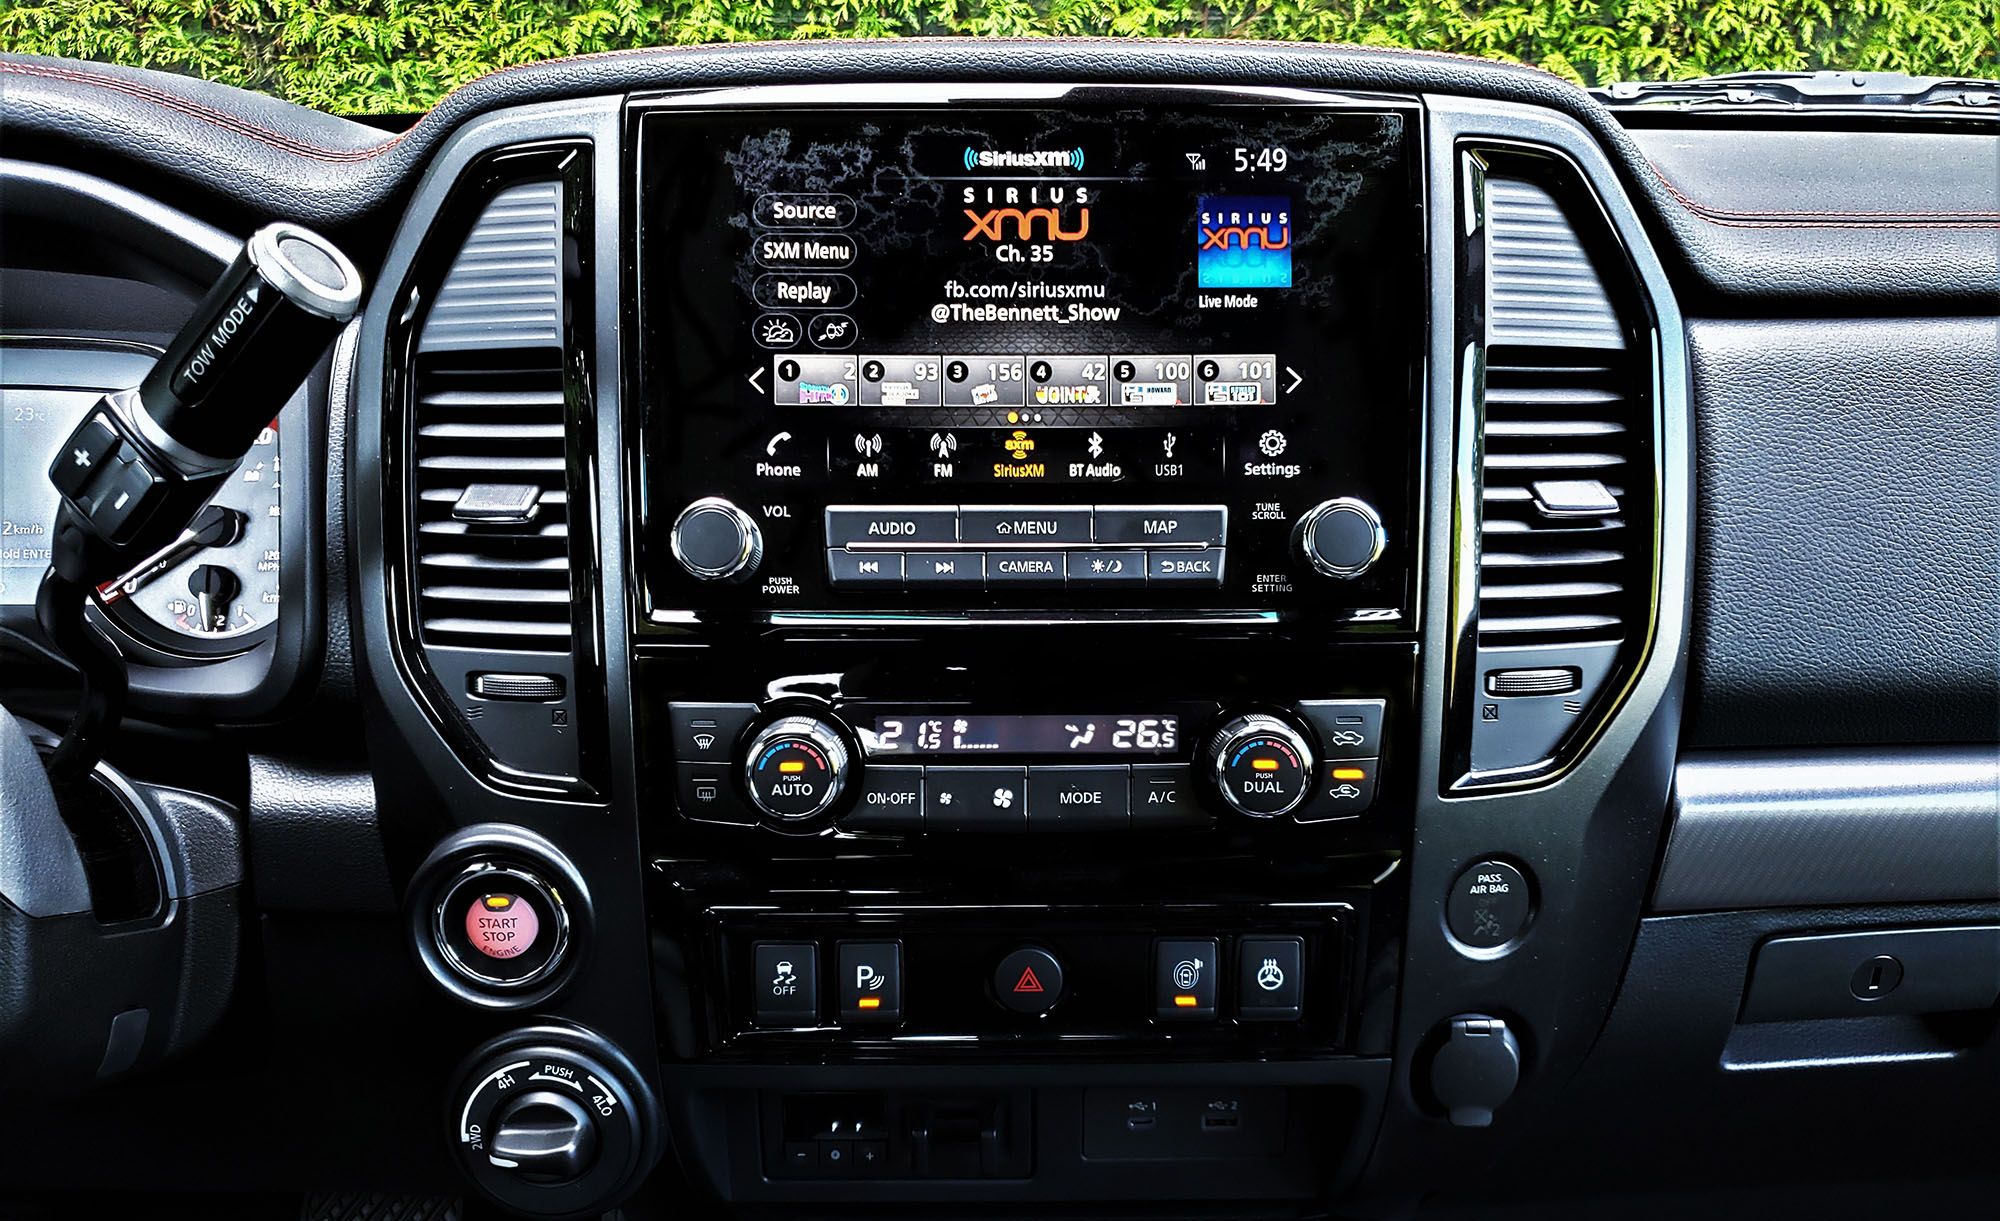 2022 Nissan Titan Crew Cab PRO 4X Luxury model's infotainment system is impressive, and all controls are well laid out and easy to use.